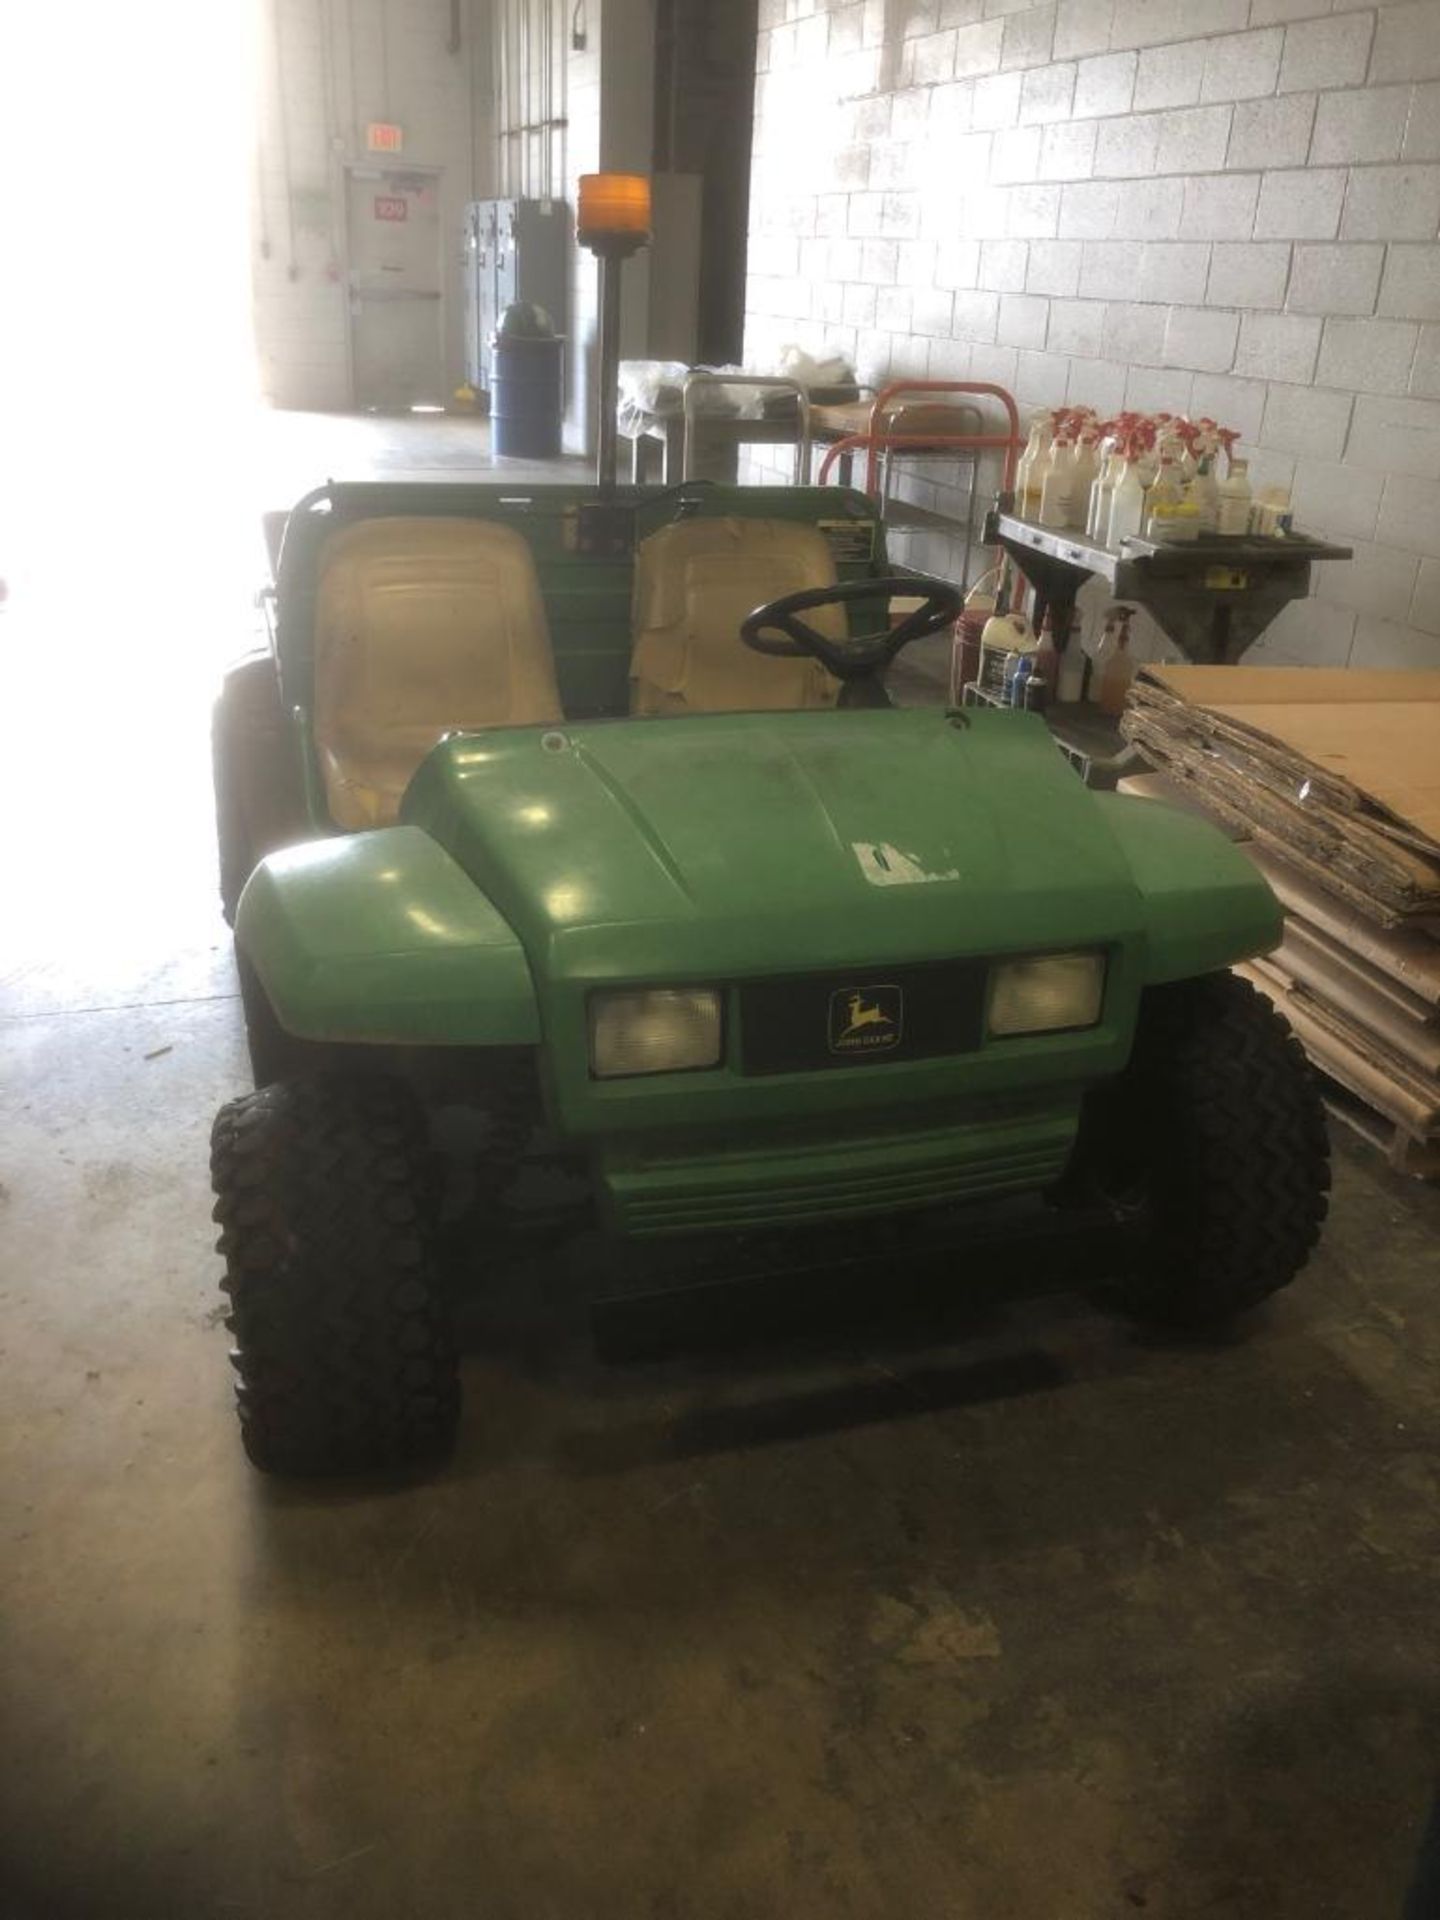 JOHN DEERE GATOR 4X2, DUMP BED, 3,914 HOURS  ***DELAYED REMOVAL UNTIL AUGUST 1ST, BUYER WILL BE - Image 2 of 4